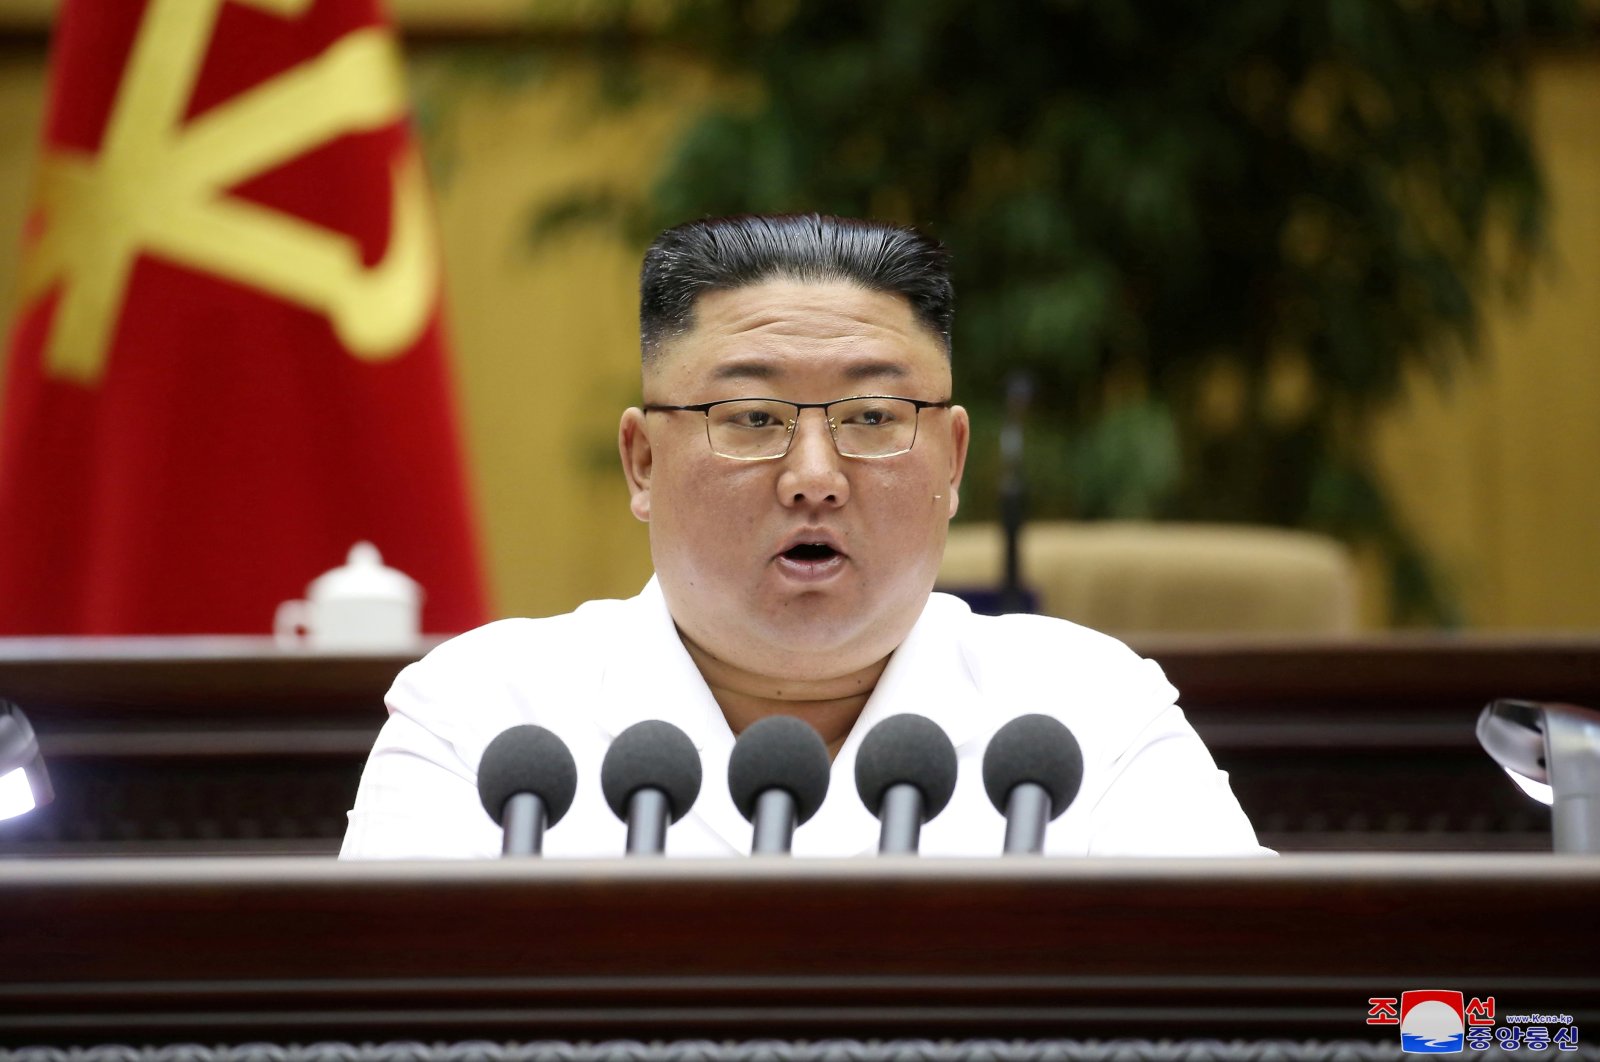 North Korean leader Kim Jong Un delivers a closing speech at the Sixth Conference of Cell Secretaries of the Workers' Party of Korea in Pyongyang, North Korea, April 8, 2021. (Reuters Photo)